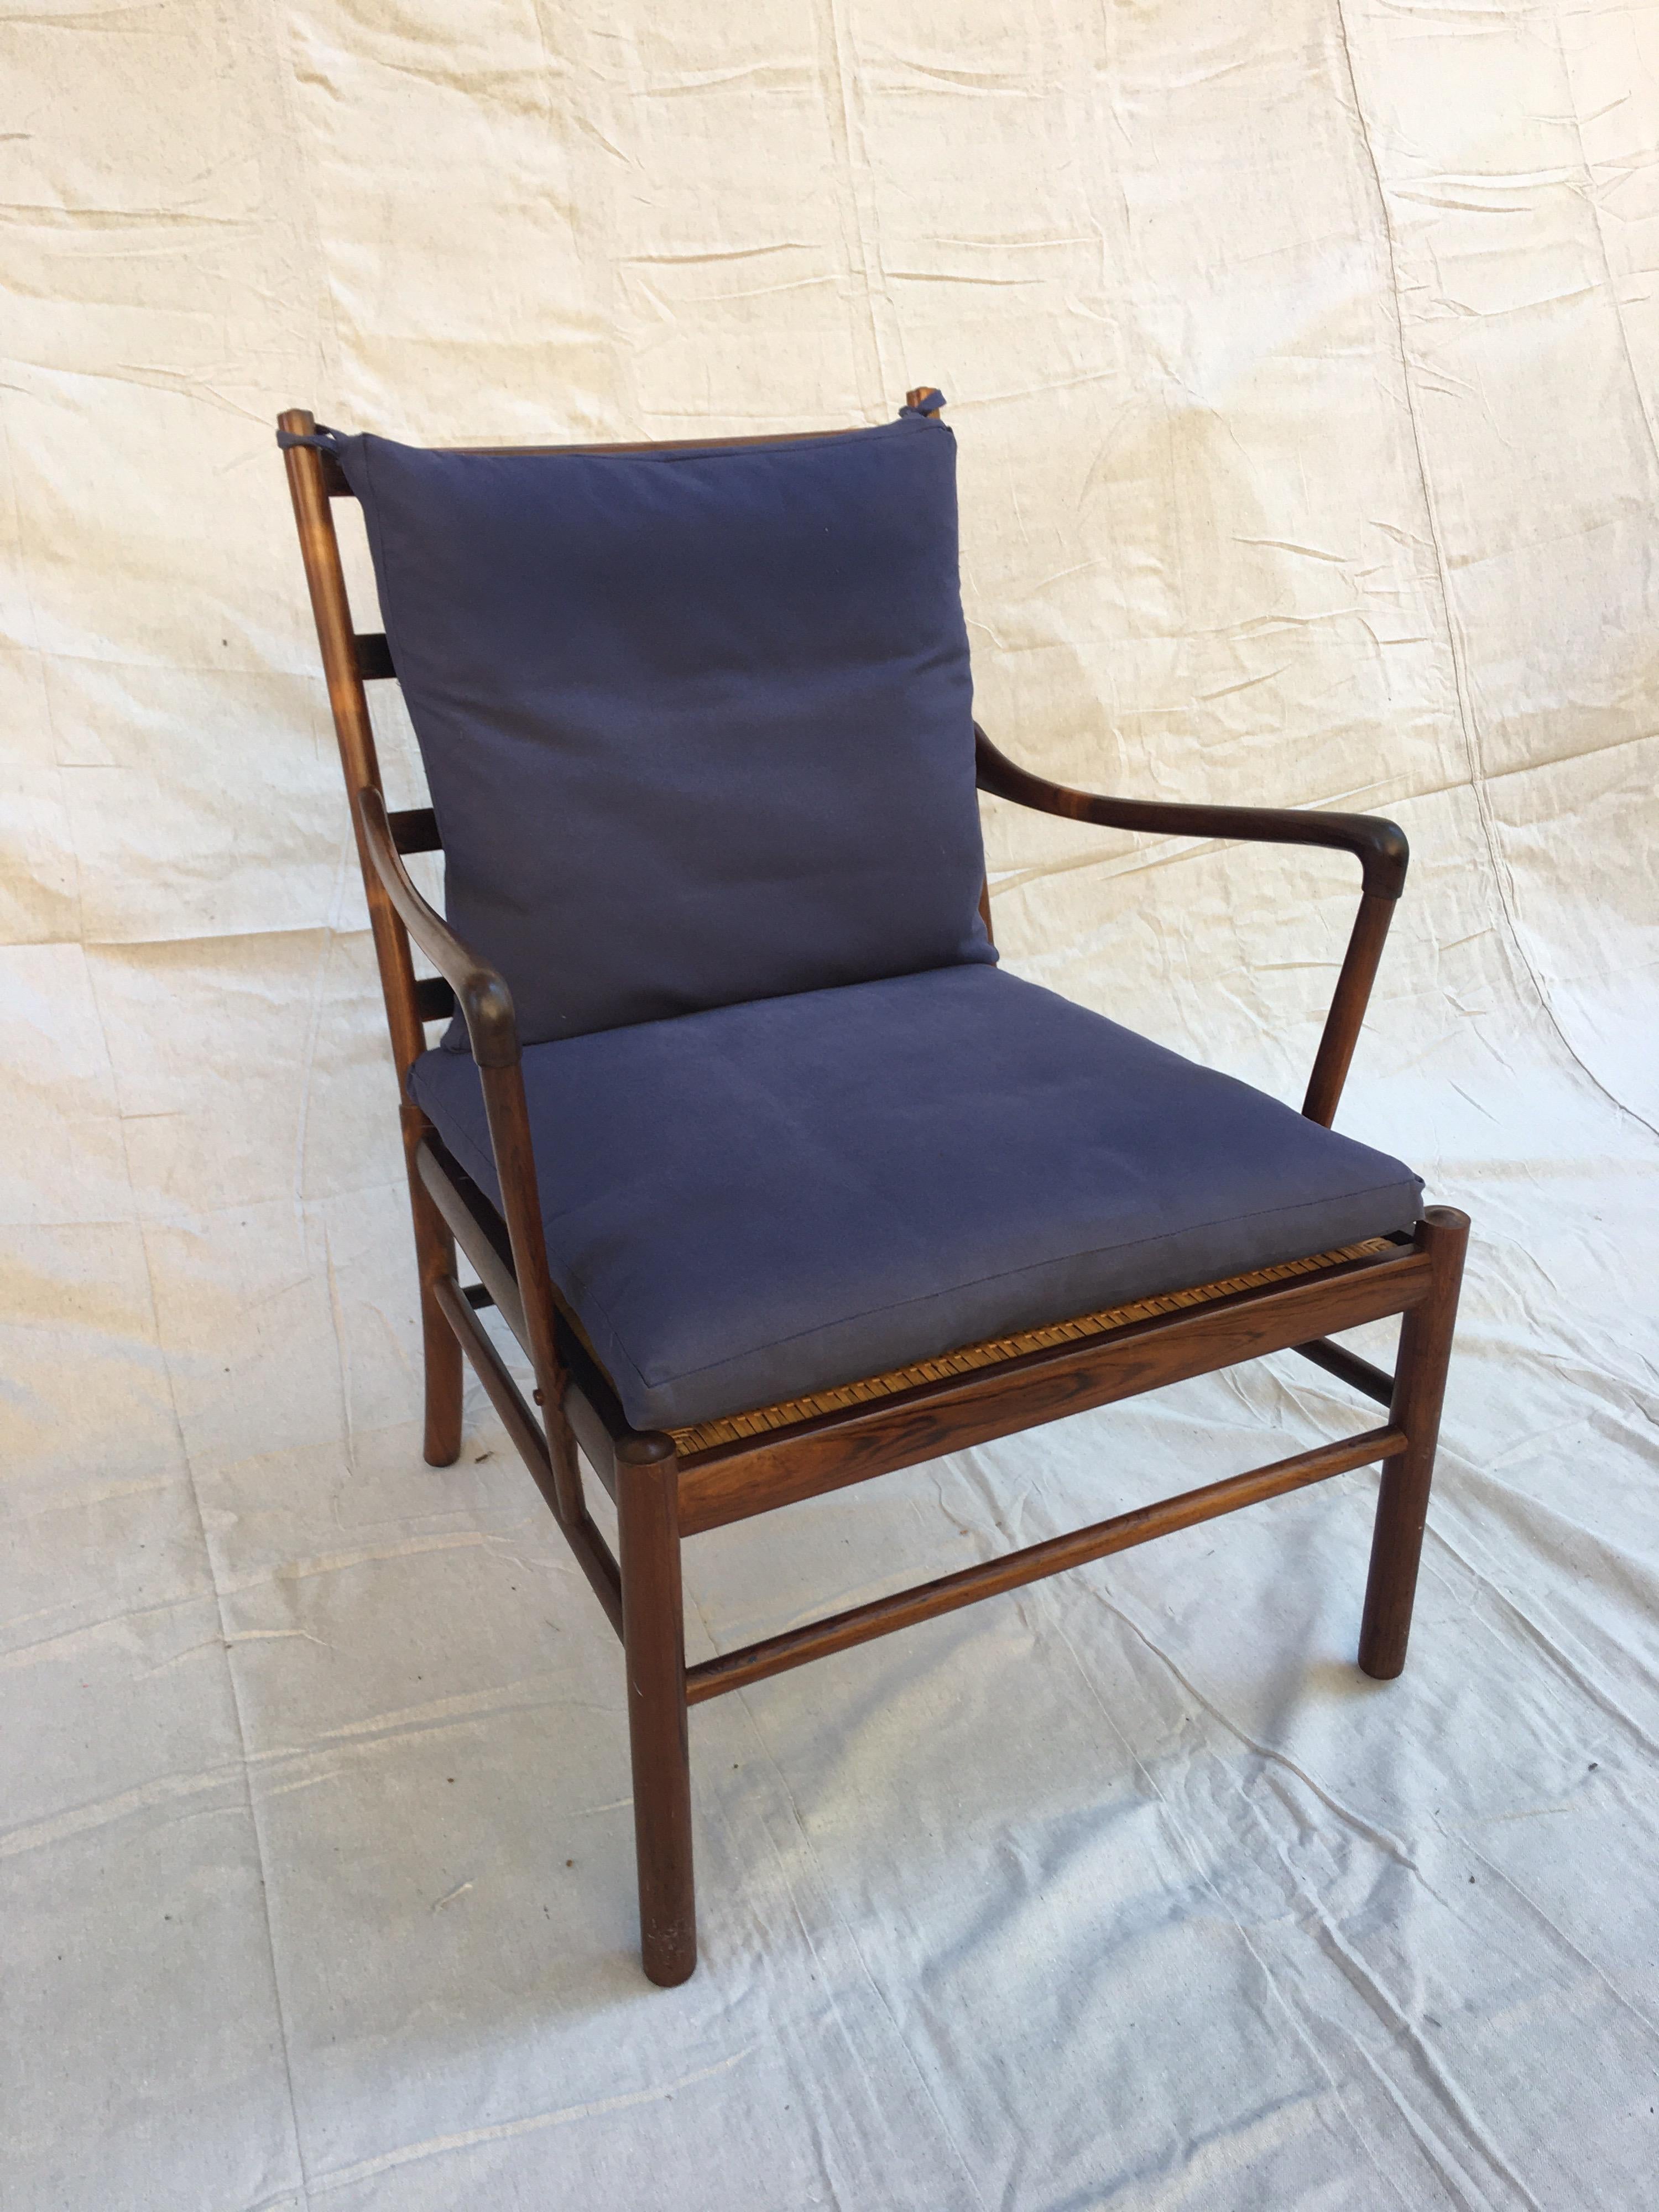 Ole Wanscher colonial chair in rosewood. Beautiful chair, beautiful wood! Grain in amazing, color is rich with no fading! Original caned seat panel. Looks like the cushions were redone at some point in their life. Solid construction, ready to go!